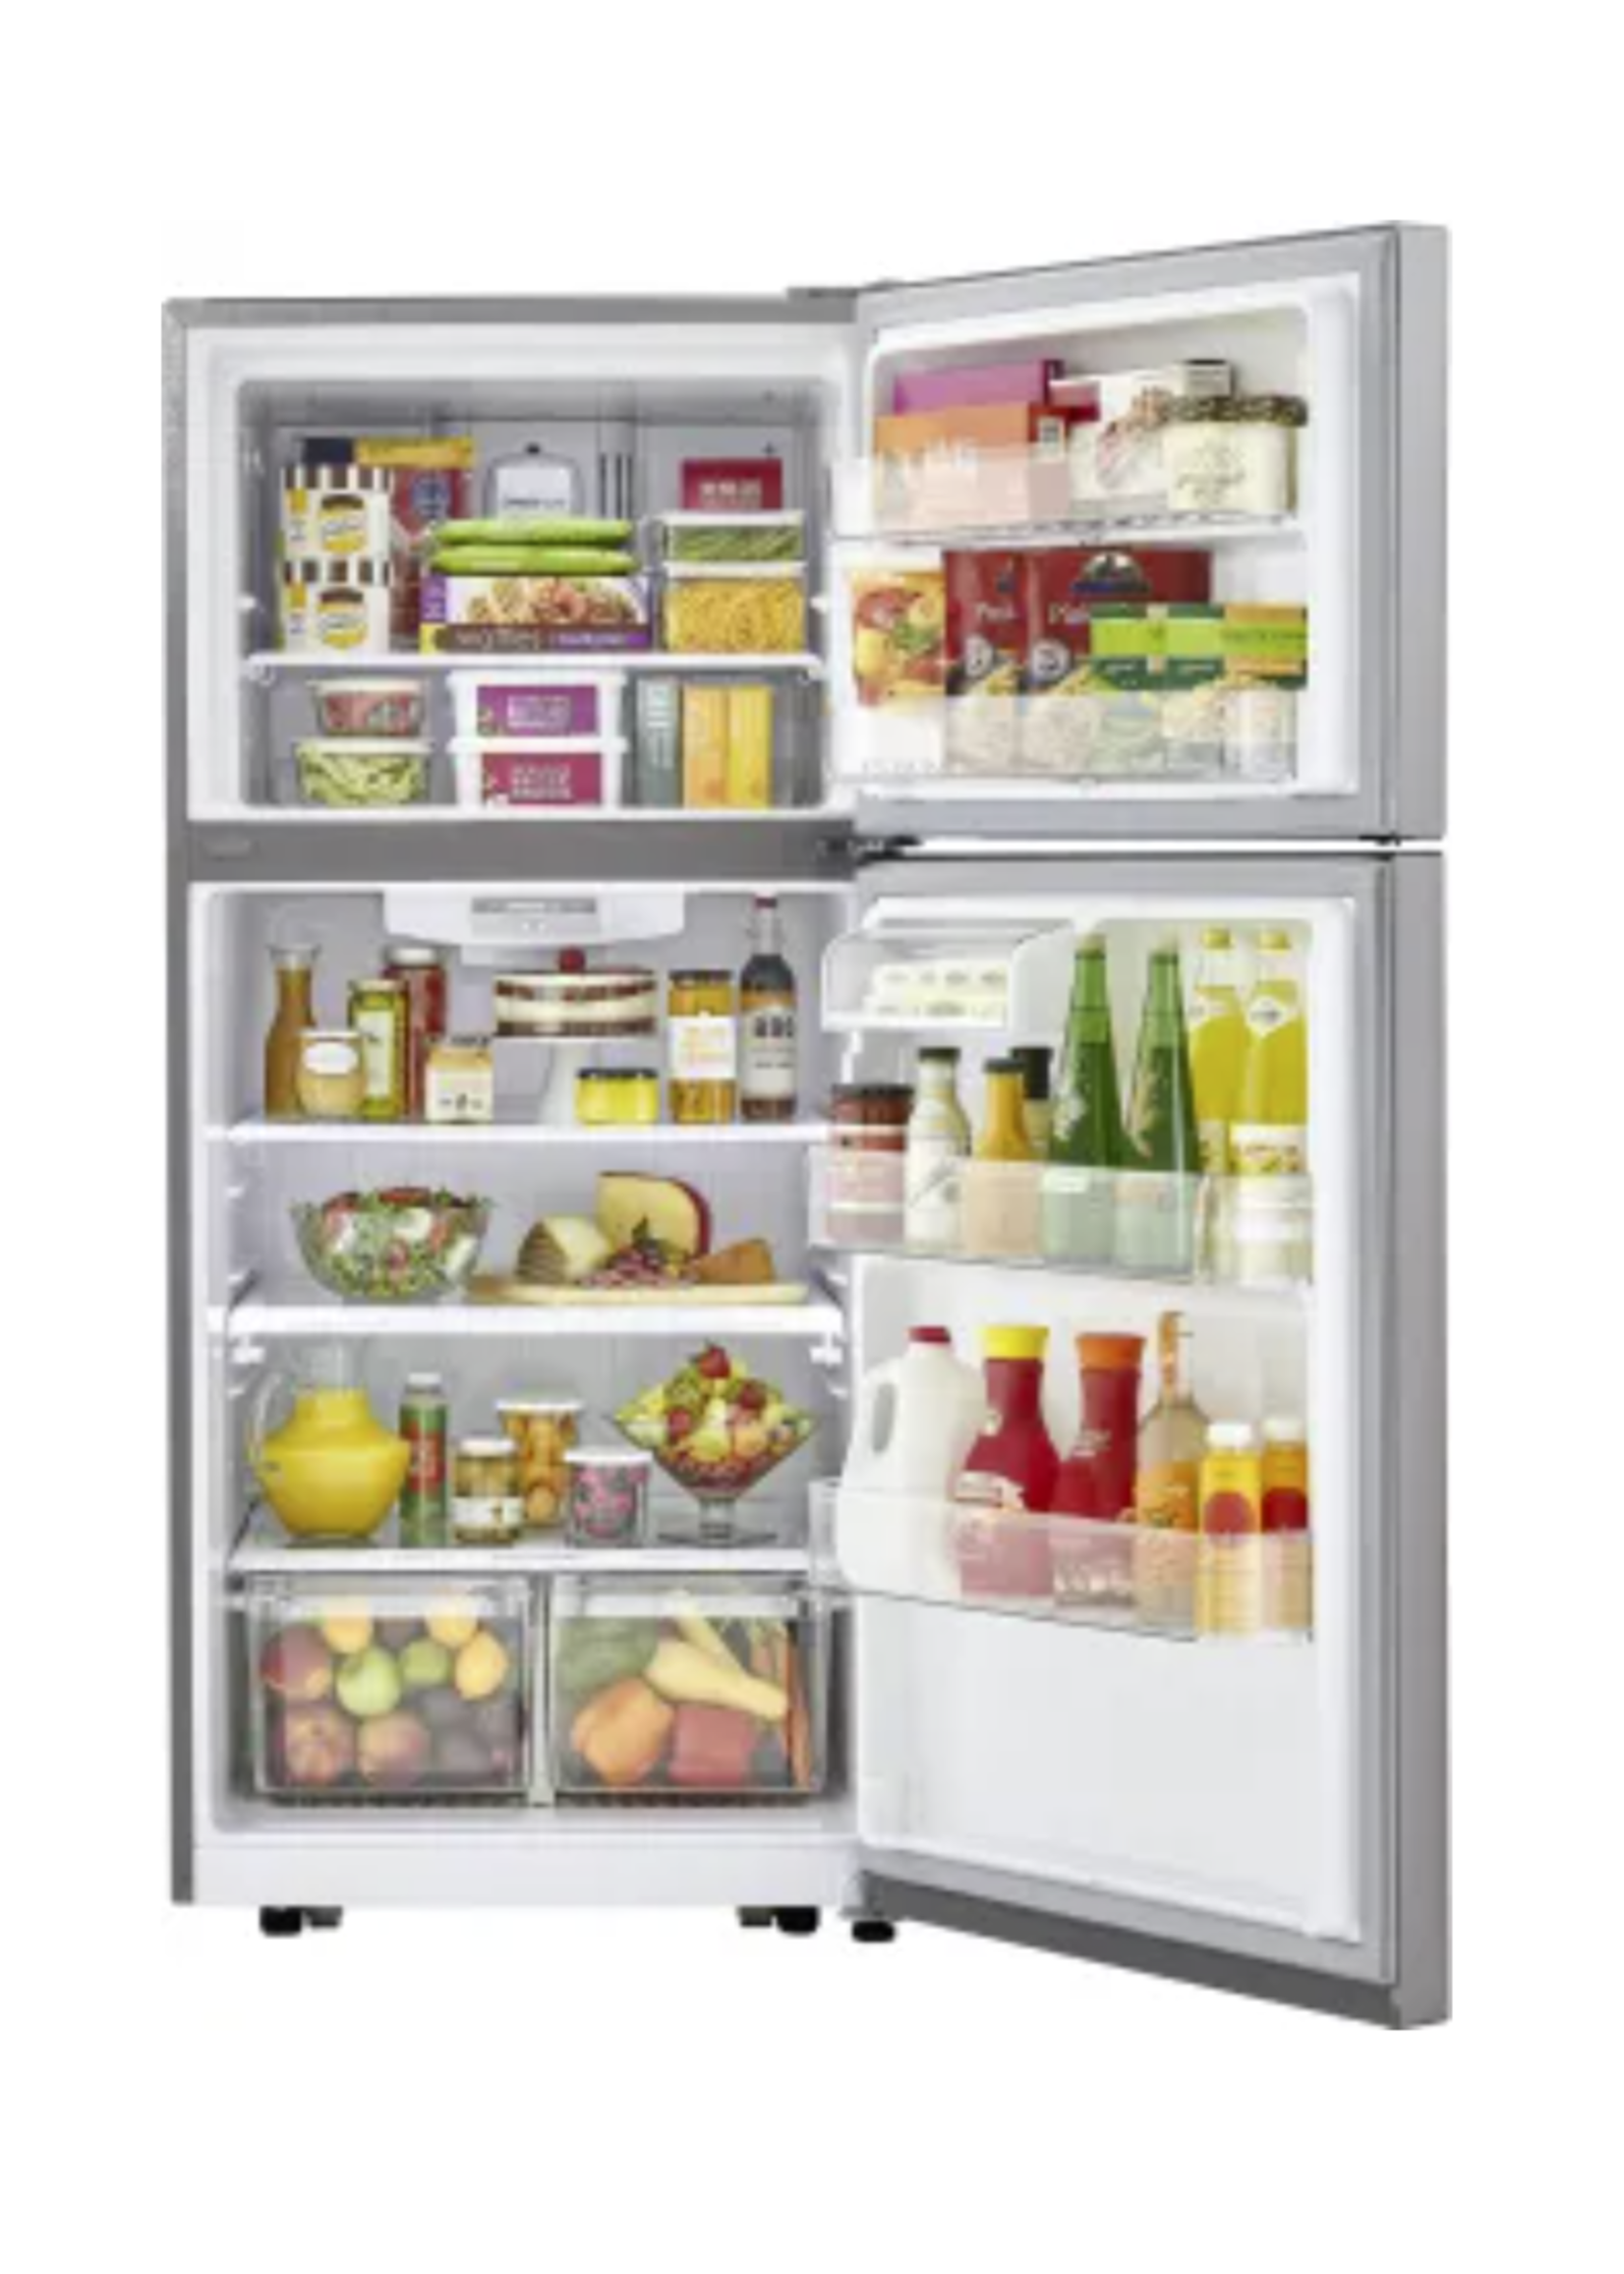 LG 30 Inch Top Freezer Refrigerator with 20.2 Cu. Ft. Total Capacity